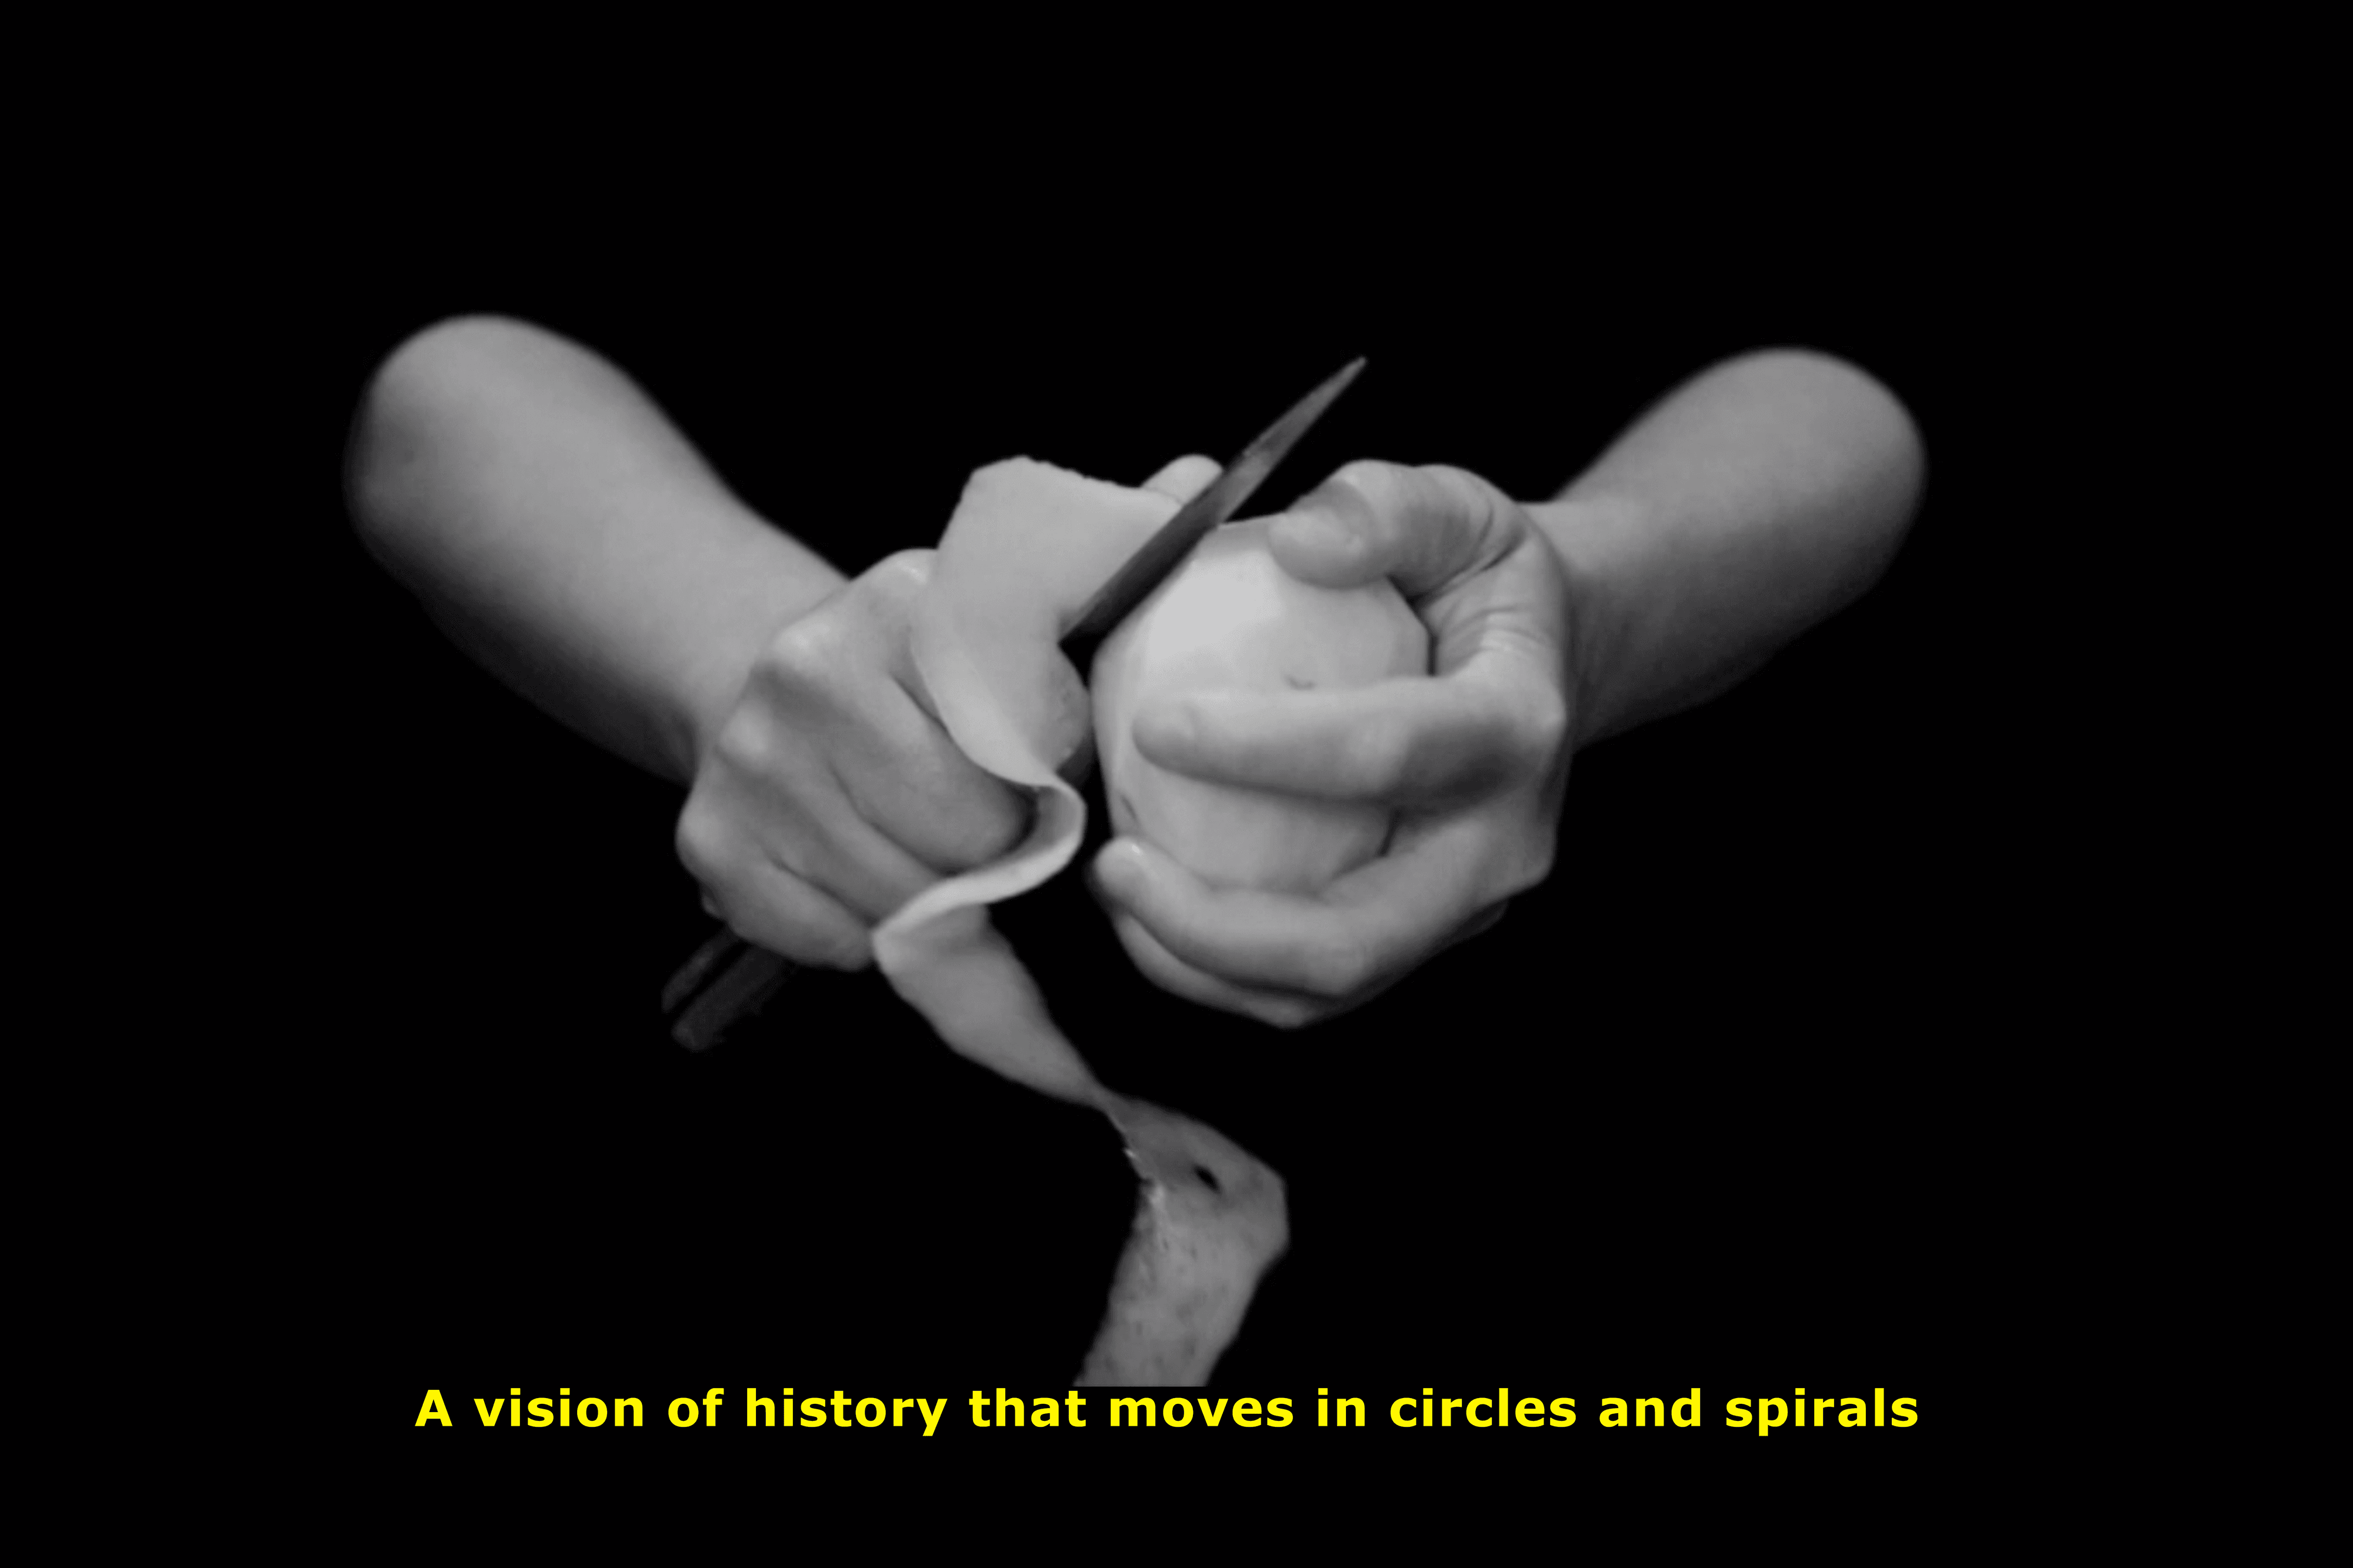 A vision of history that moves in circles and spirals